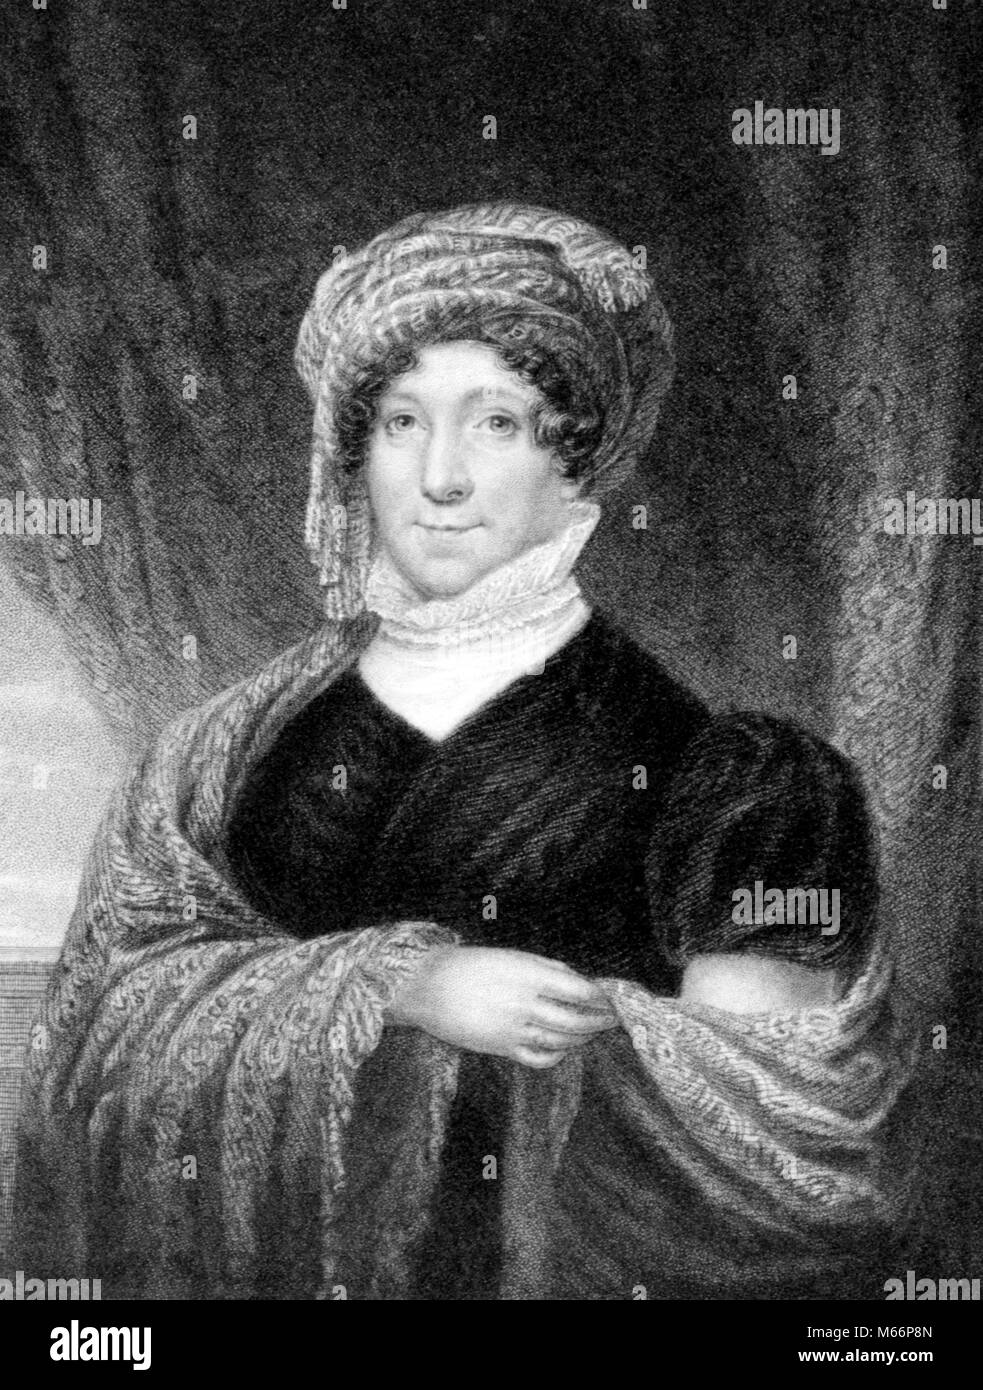 1800s 1810s MRS. DOLLEY PAYNE MADISON FIRST LADY WIFE OF JAMES MADISON LOOKING AT CAMERA HALFTONE - q62256 CPC001 HARS STYLES LEADERSHIP POLITICS SMILES JOYFUL FASHIONS MID-ADULT MID-ADULT WOMAN 1810s B&W BLACK AND WHITE CAUCASIAN ETHNICITY DOLLEY FIRST LADY JAMES LOOKING AT CAMERA MADISON MRS. OLD FASHIONED PAYNE PERSONS PRESIDENT’S Stock Photo